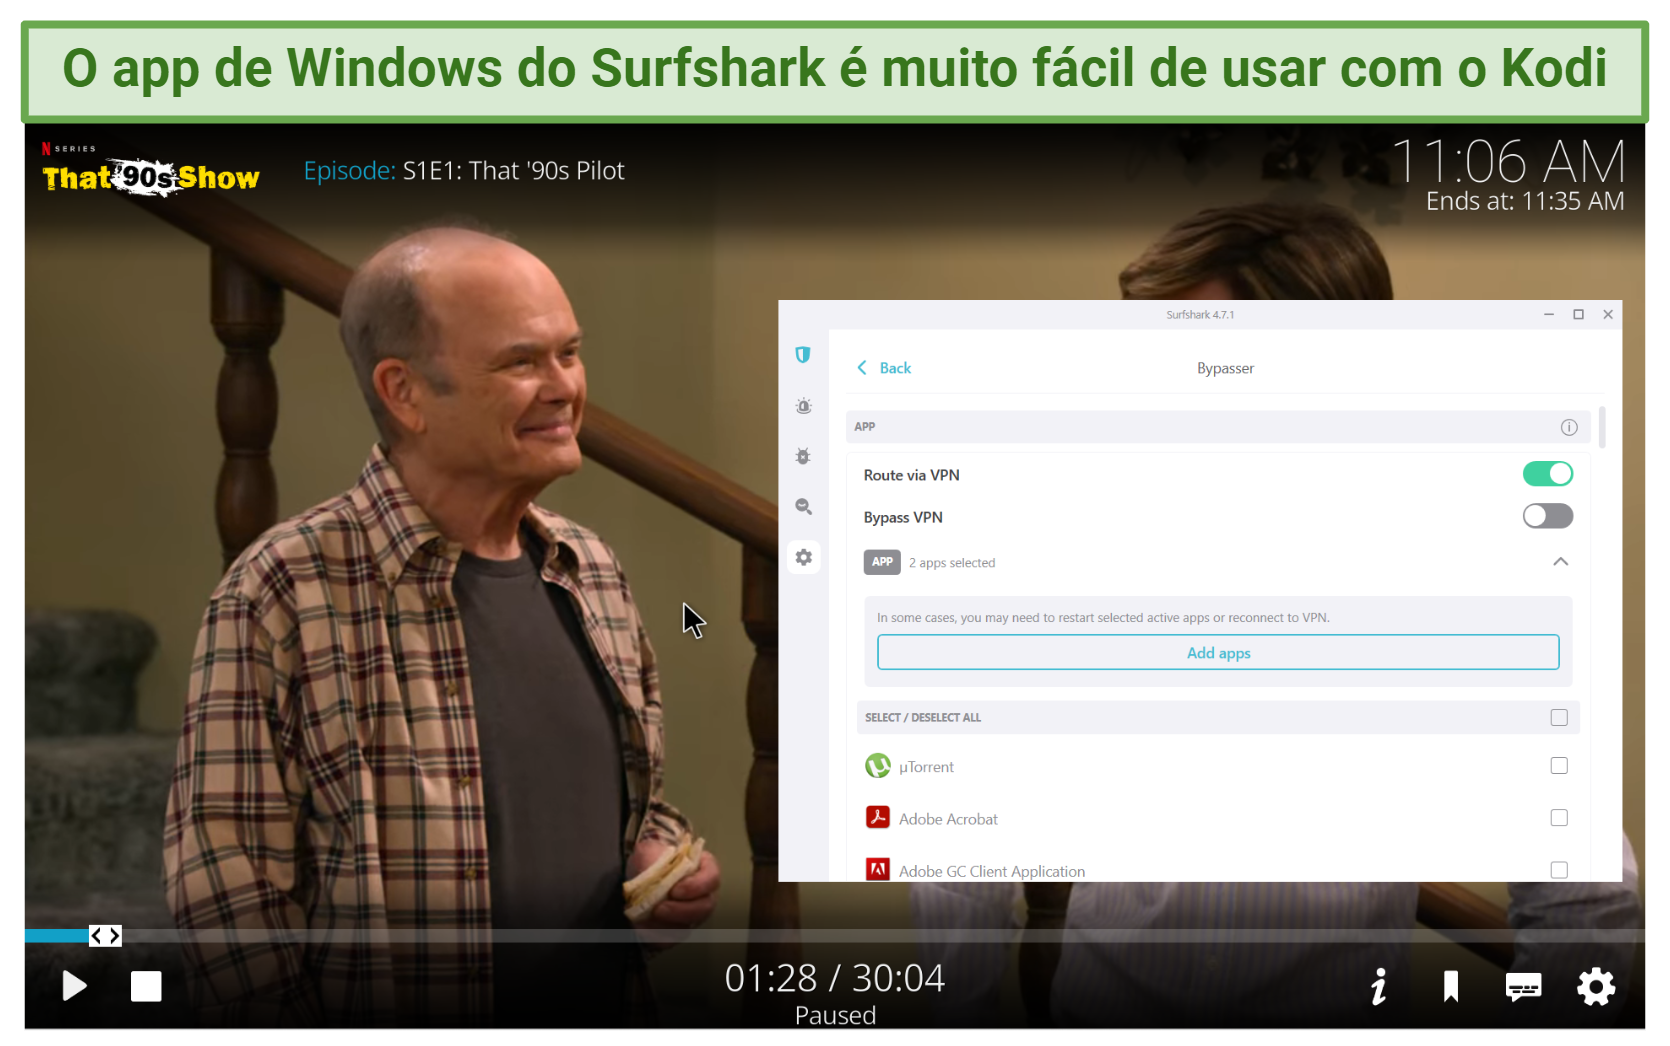 Screenshot of Surfshark's Windows app connected while watching That 90's show on Kodi's Netflix add-on